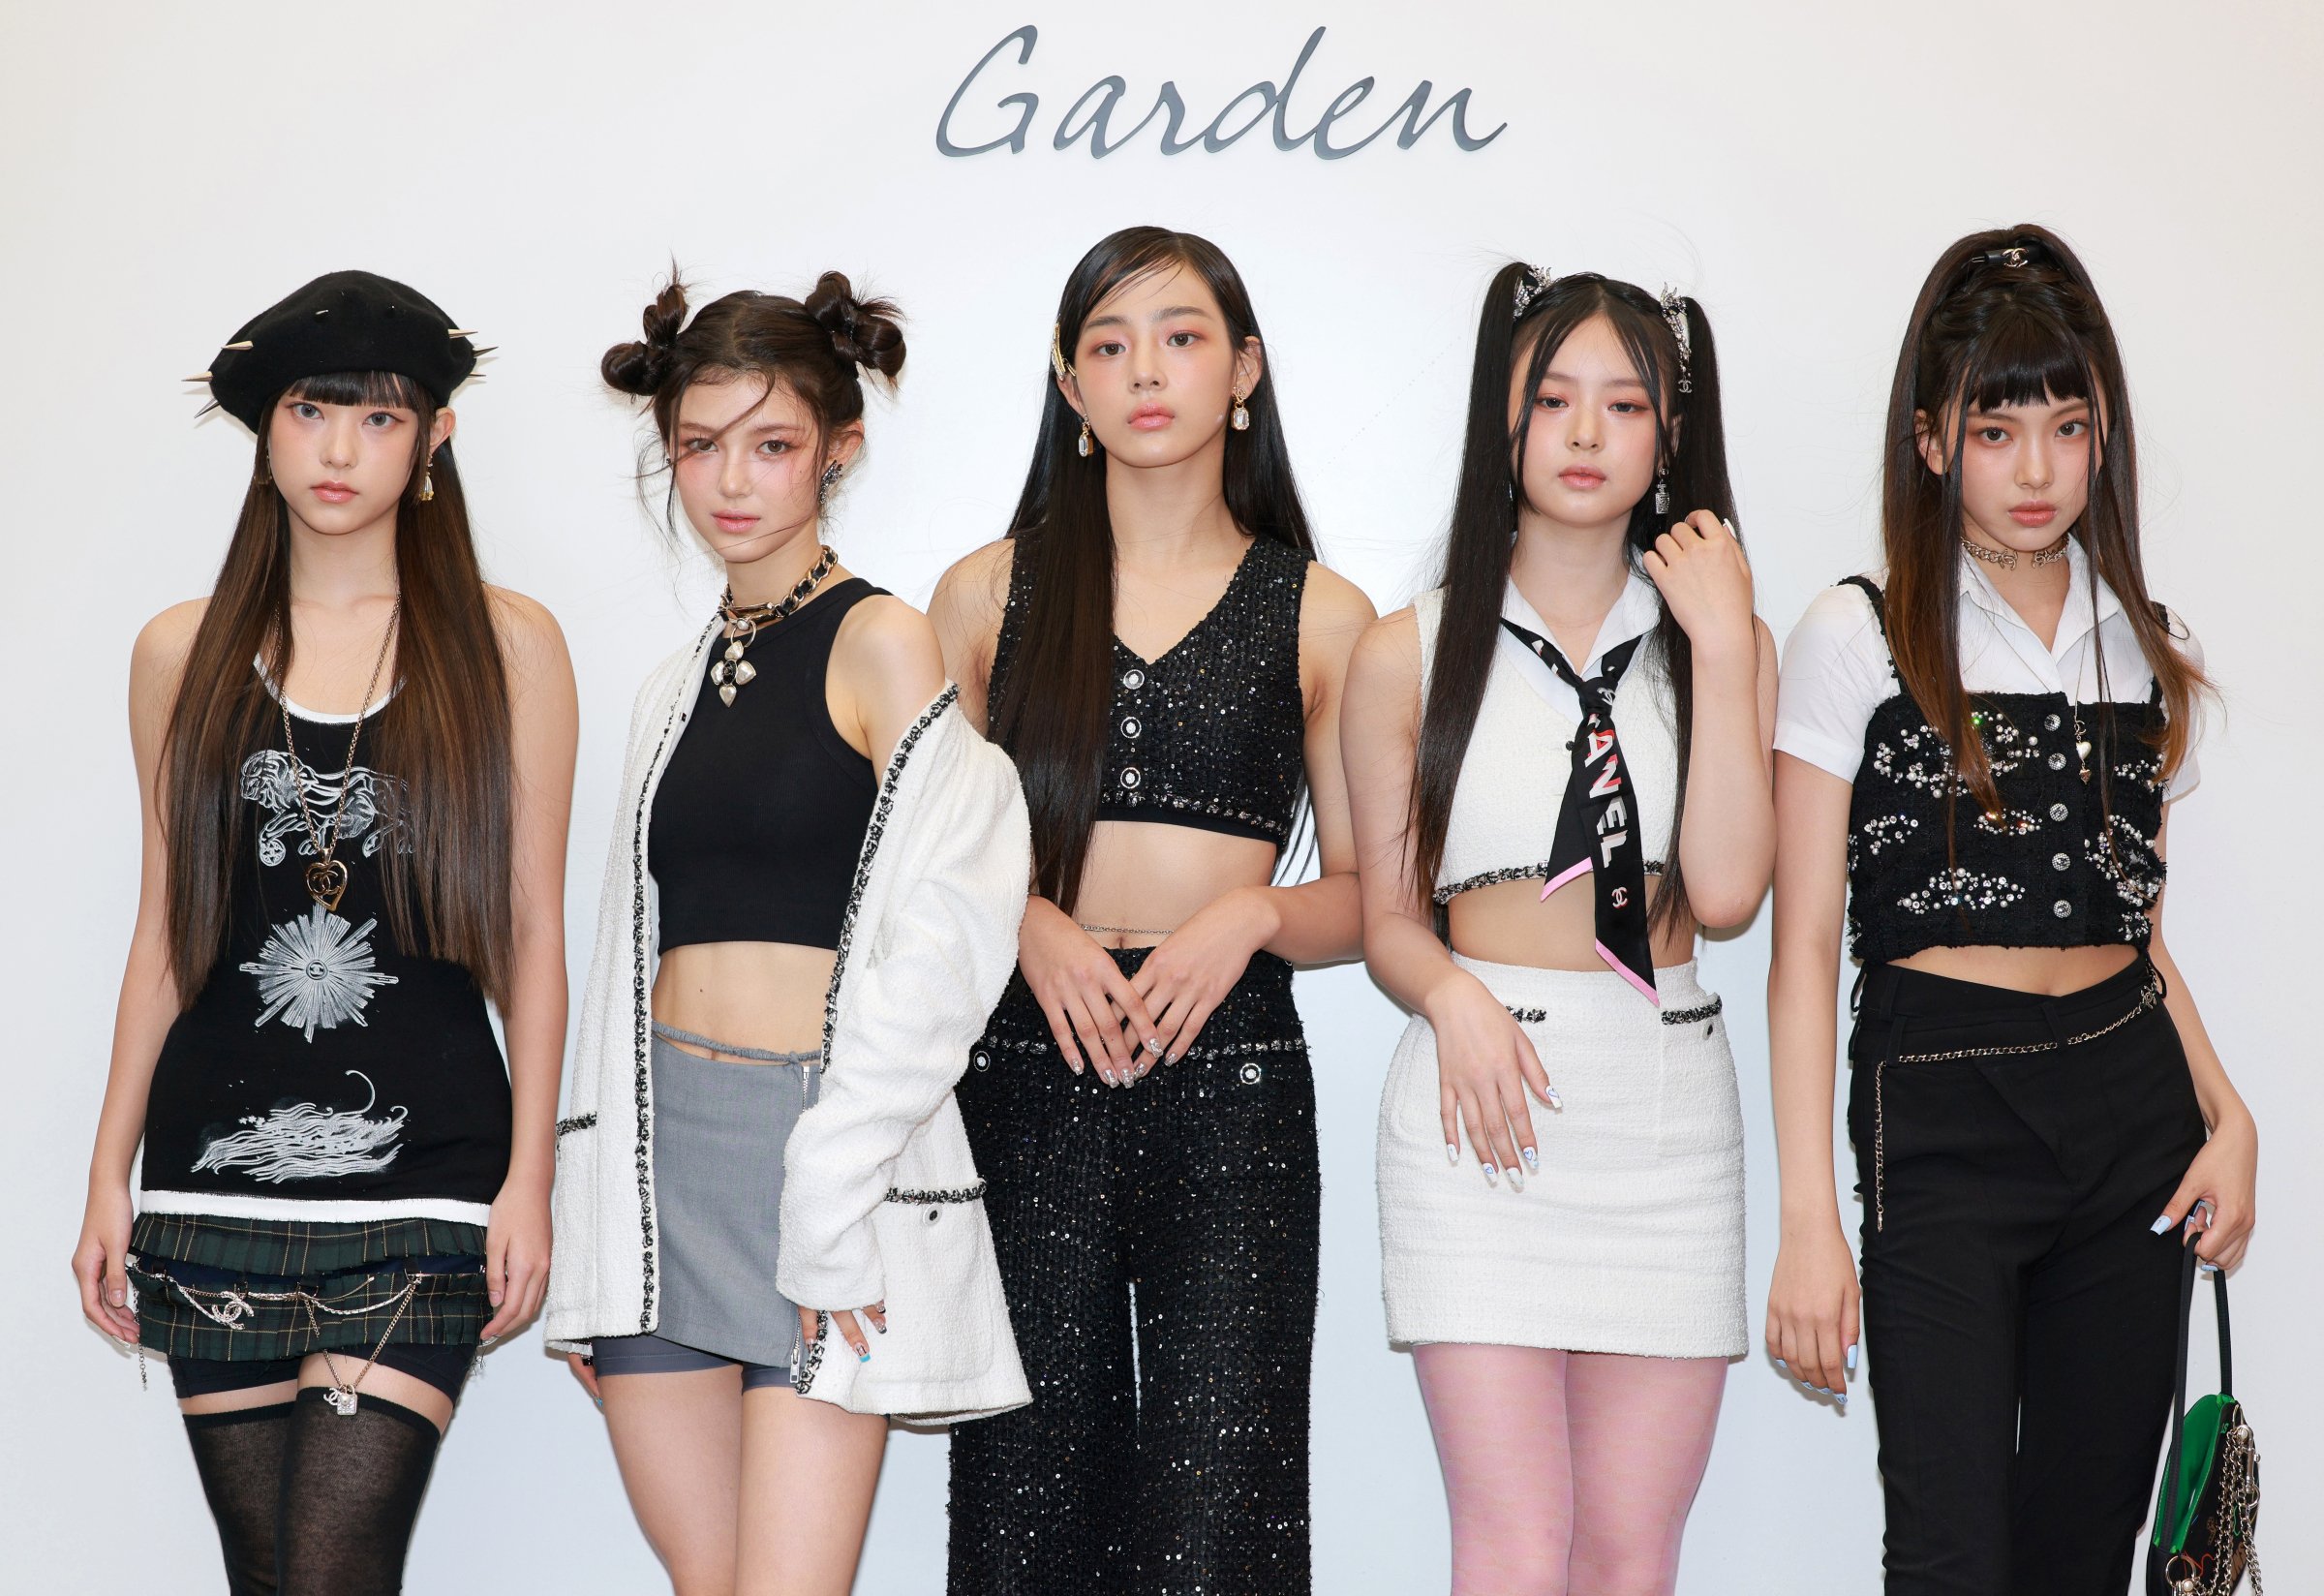 NewJeans make their first public appearance after debut at opening